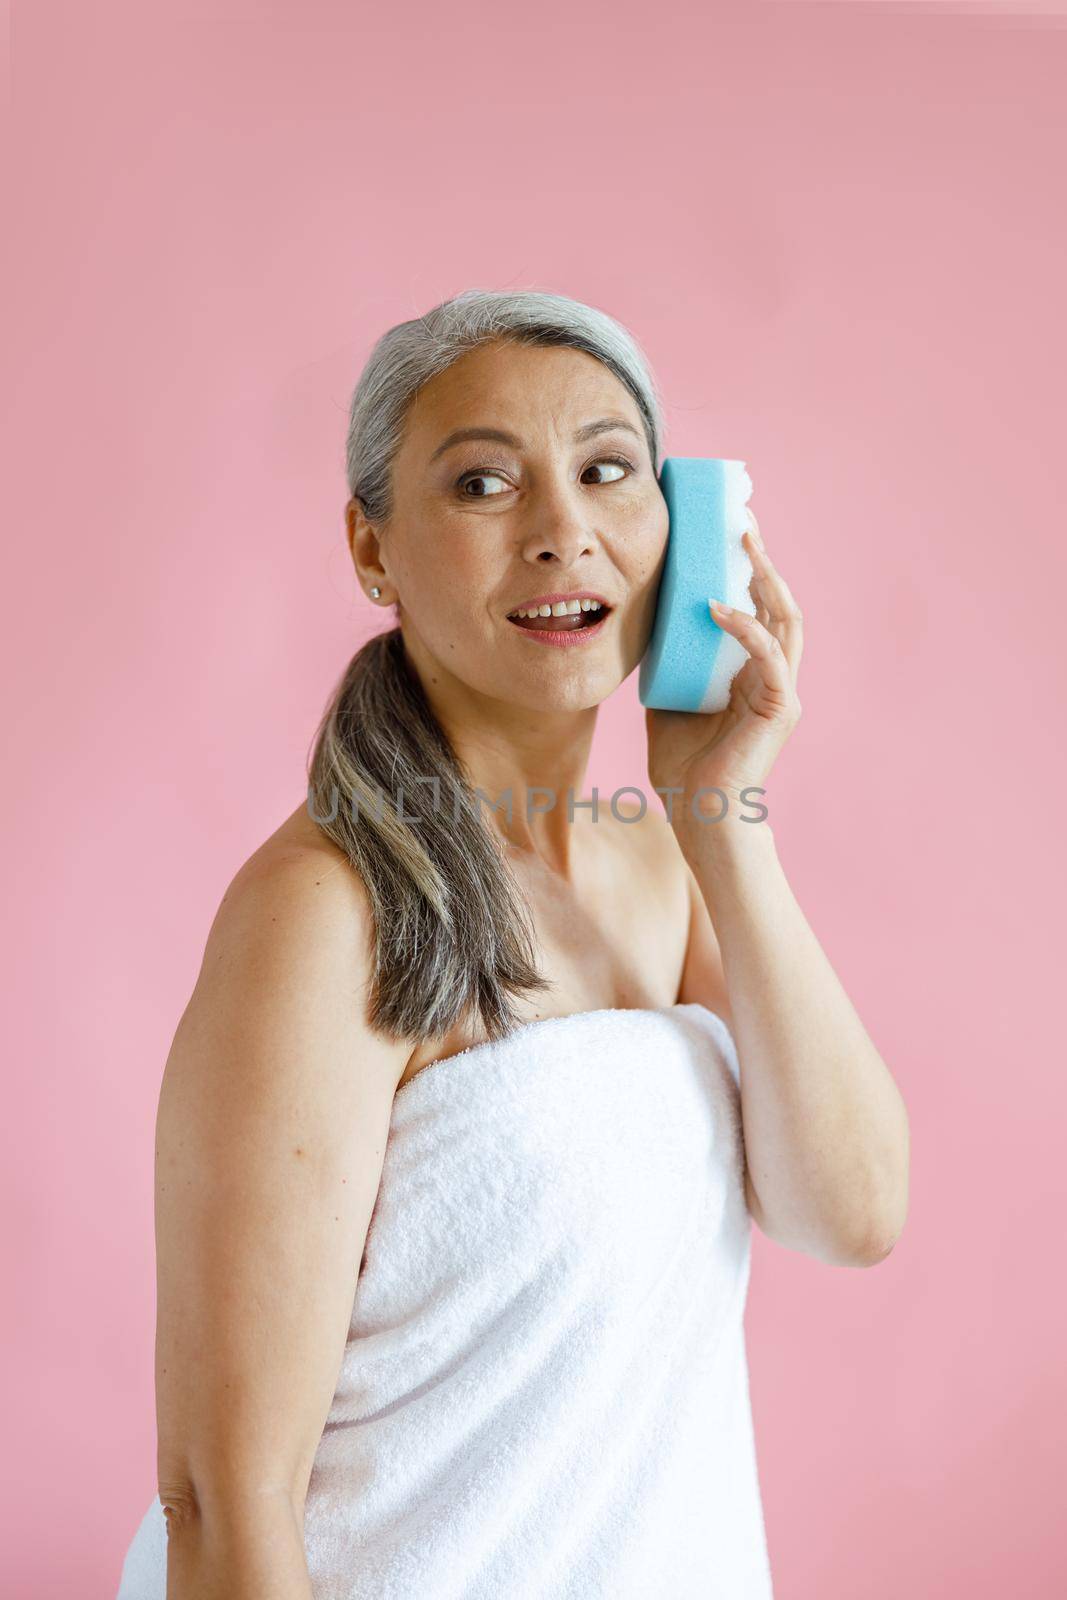 Beautiful hoary haired Asian woman with towel uses bath sponge as mobile phone on pink background in studio. Mature beauty lifestyle